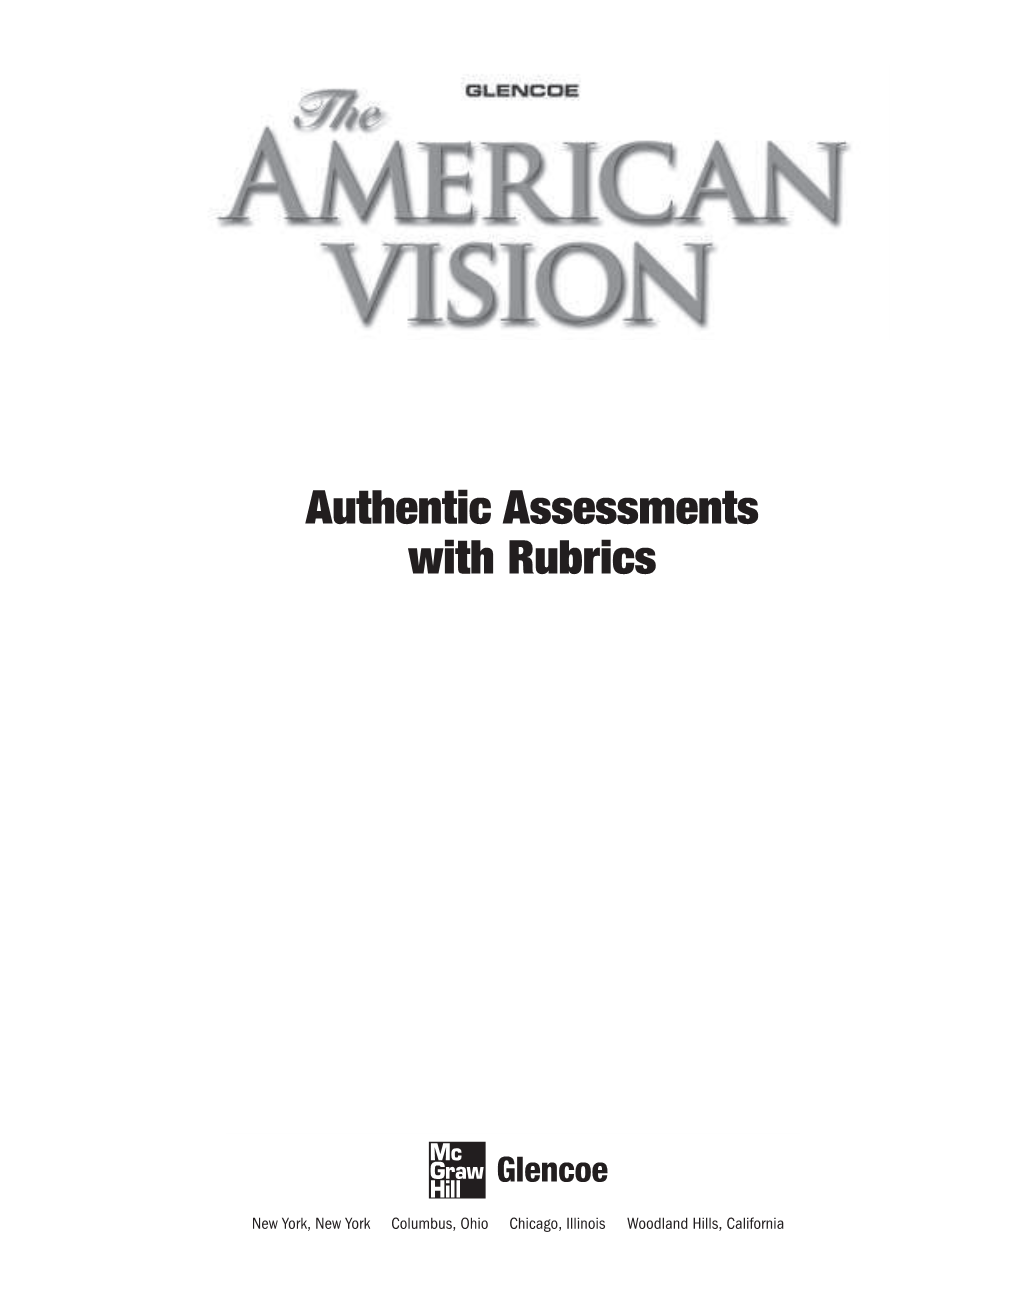 Authentic Assessments and Rubrics